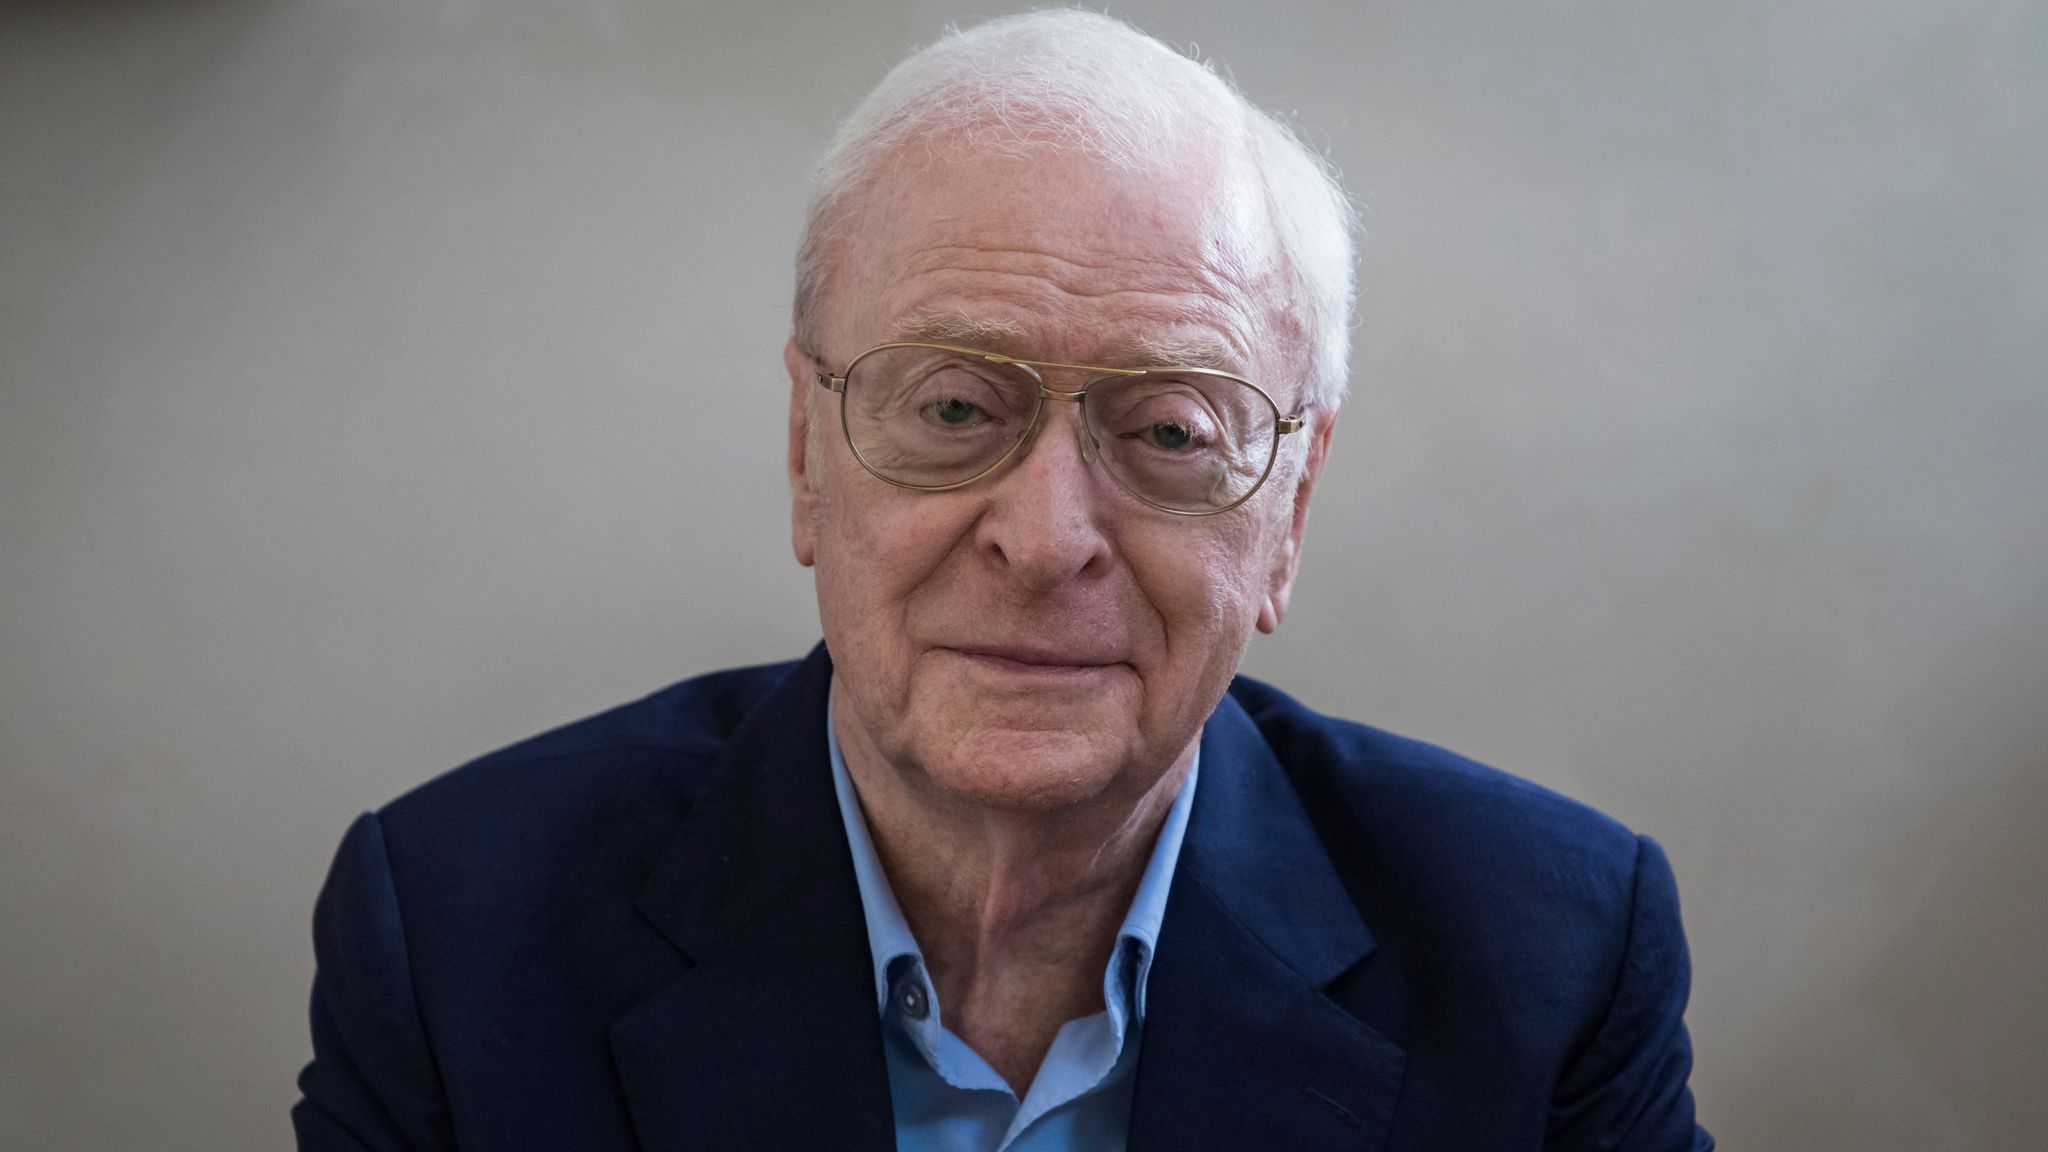 Michael Caine to retire from acting after The Great Escaper